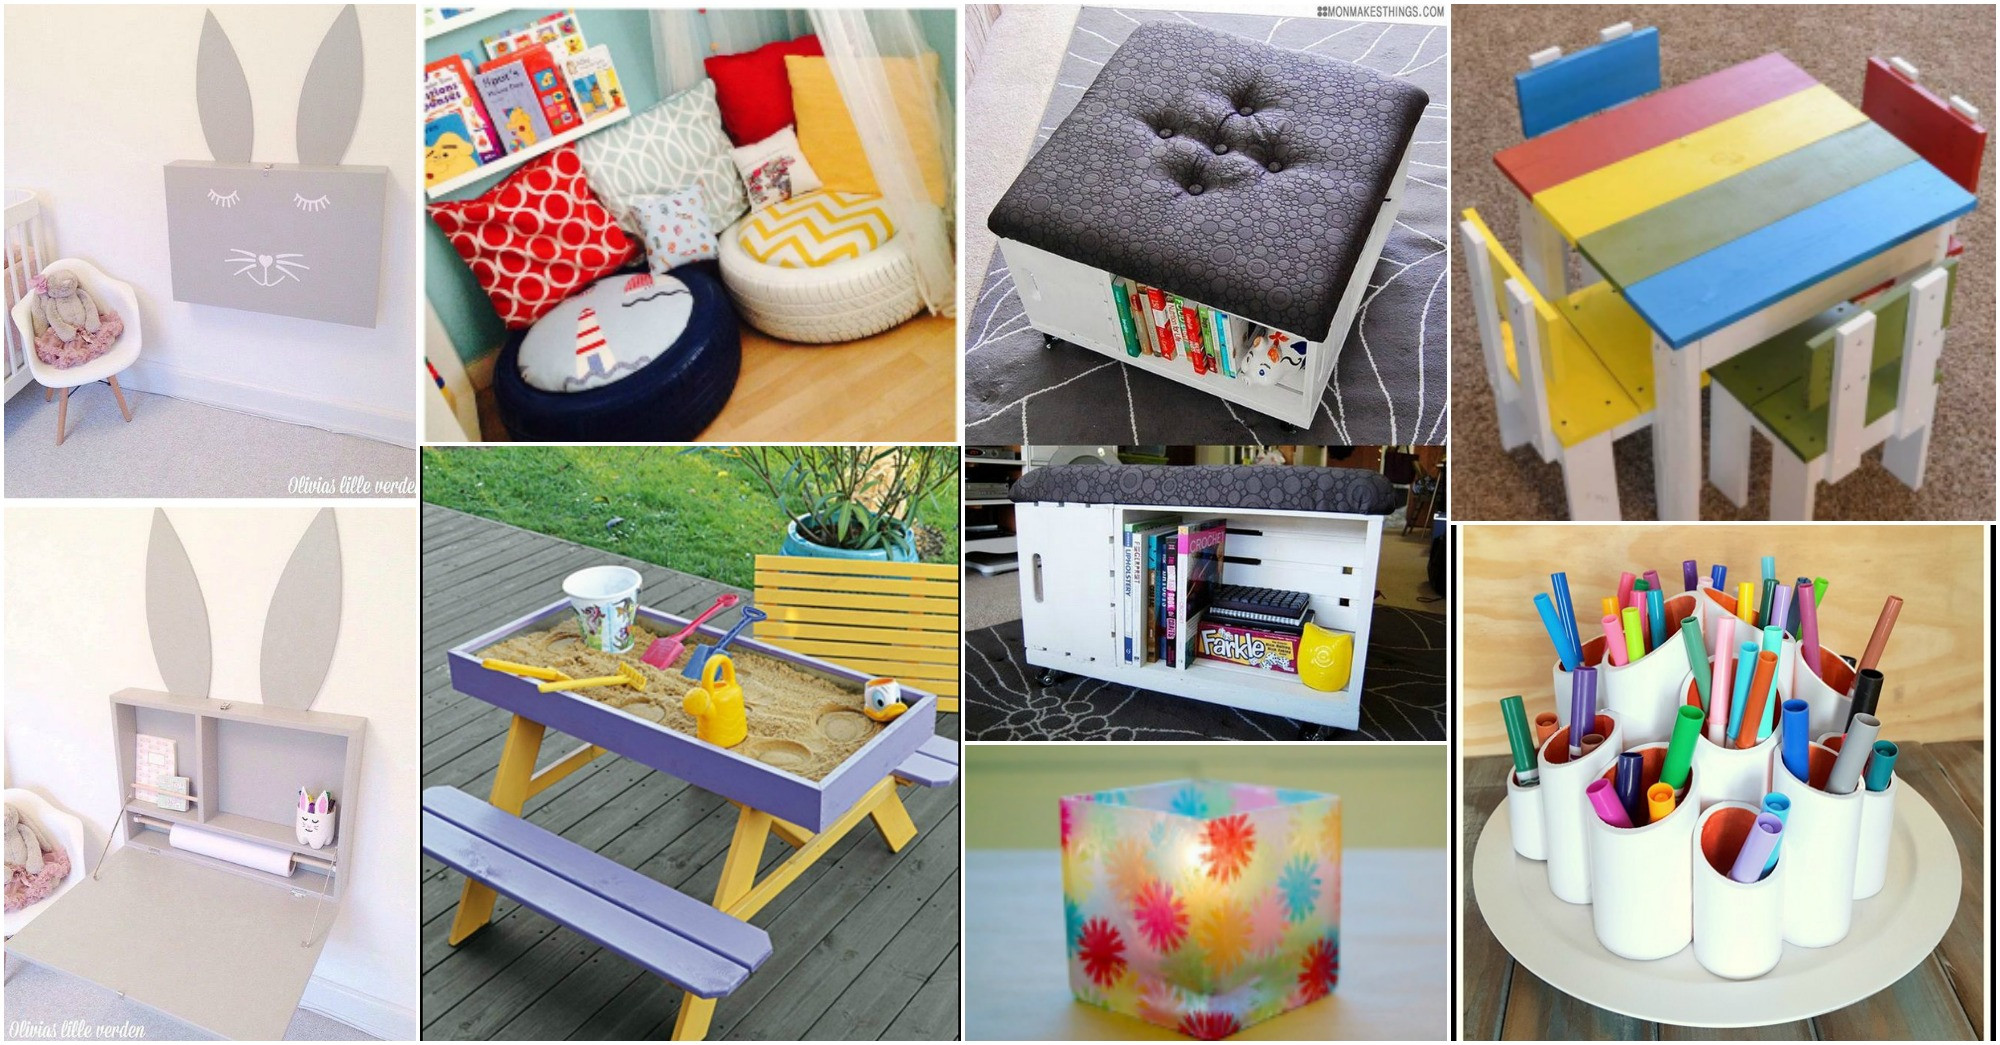 DIY Projects For Kids Rooms
 DIY Cool Kids Room Crafts That Will Make Your Kids Feel